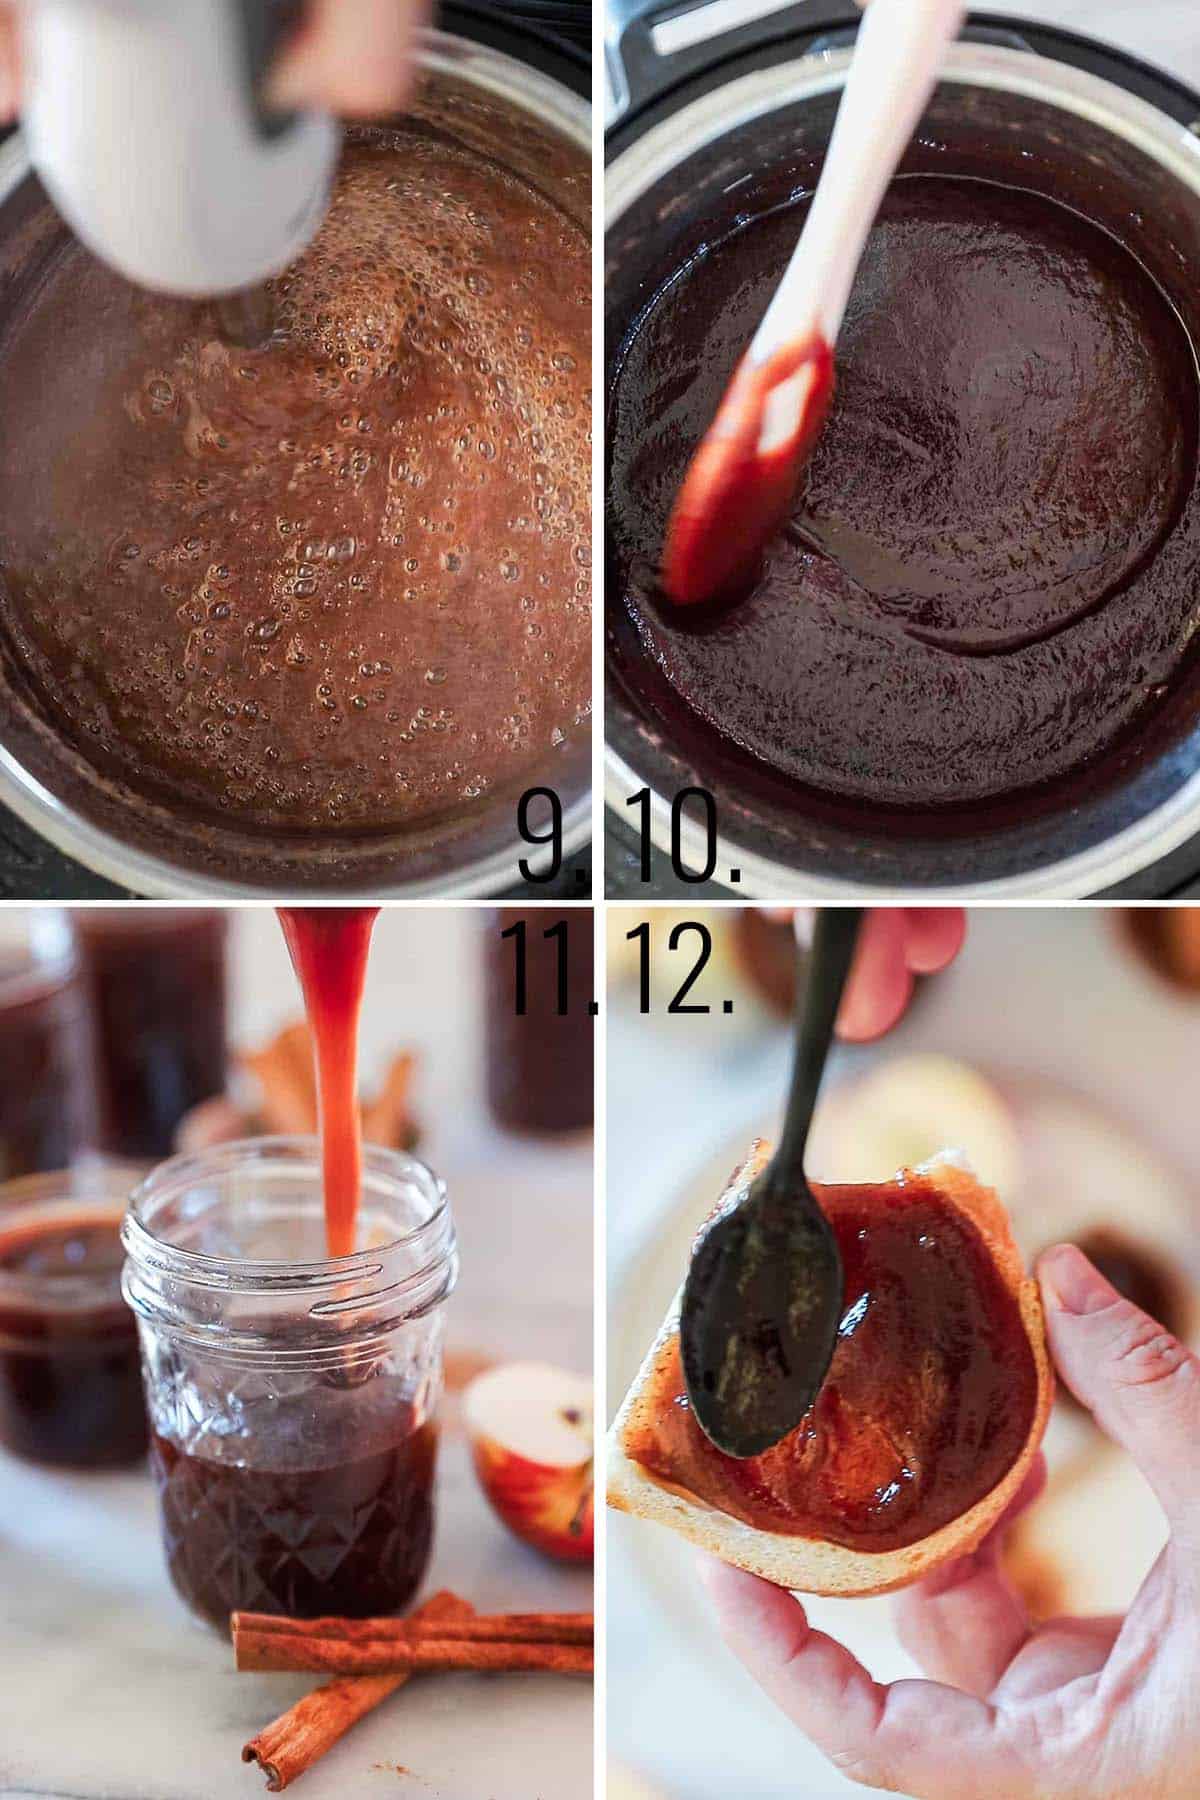 How to puree apple butter.